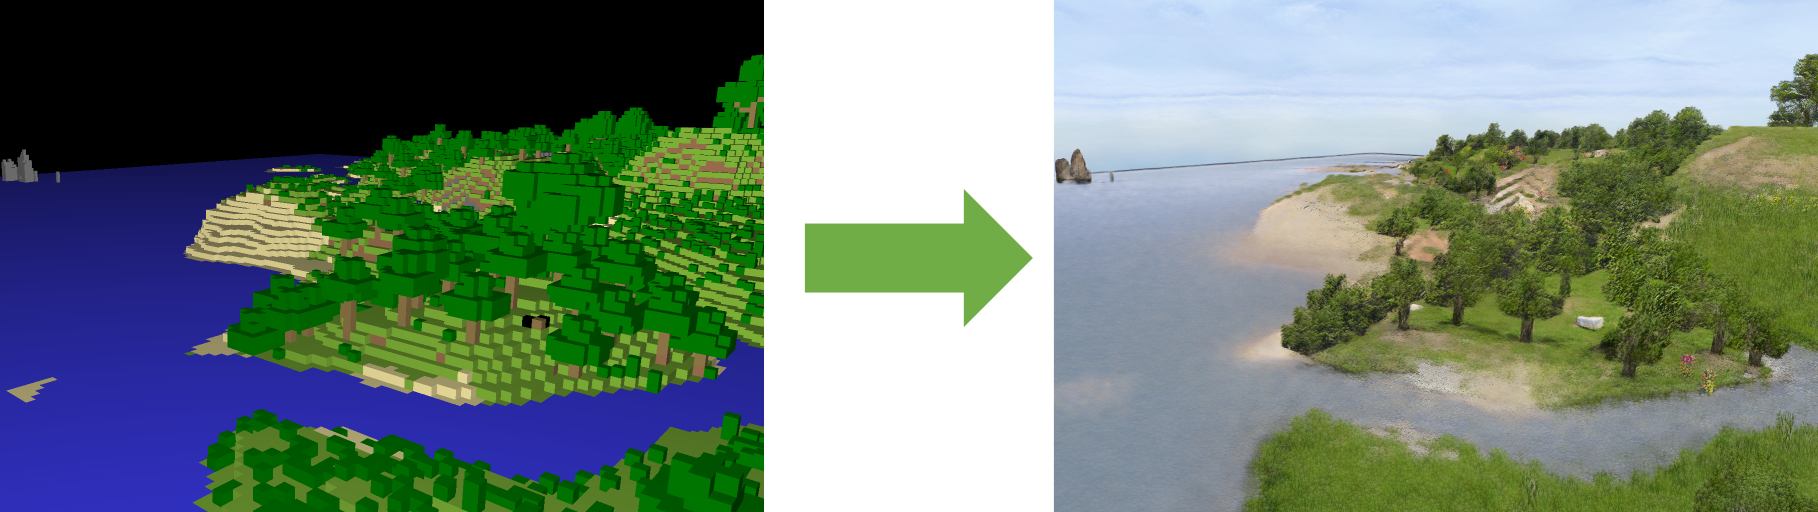 GANcraft translates a semantic block world into a set of voxel-bound NeRF-models that allows rendering of photorealistic images corresponding to this “Minecraft” world, additionally conditioned a style latent code